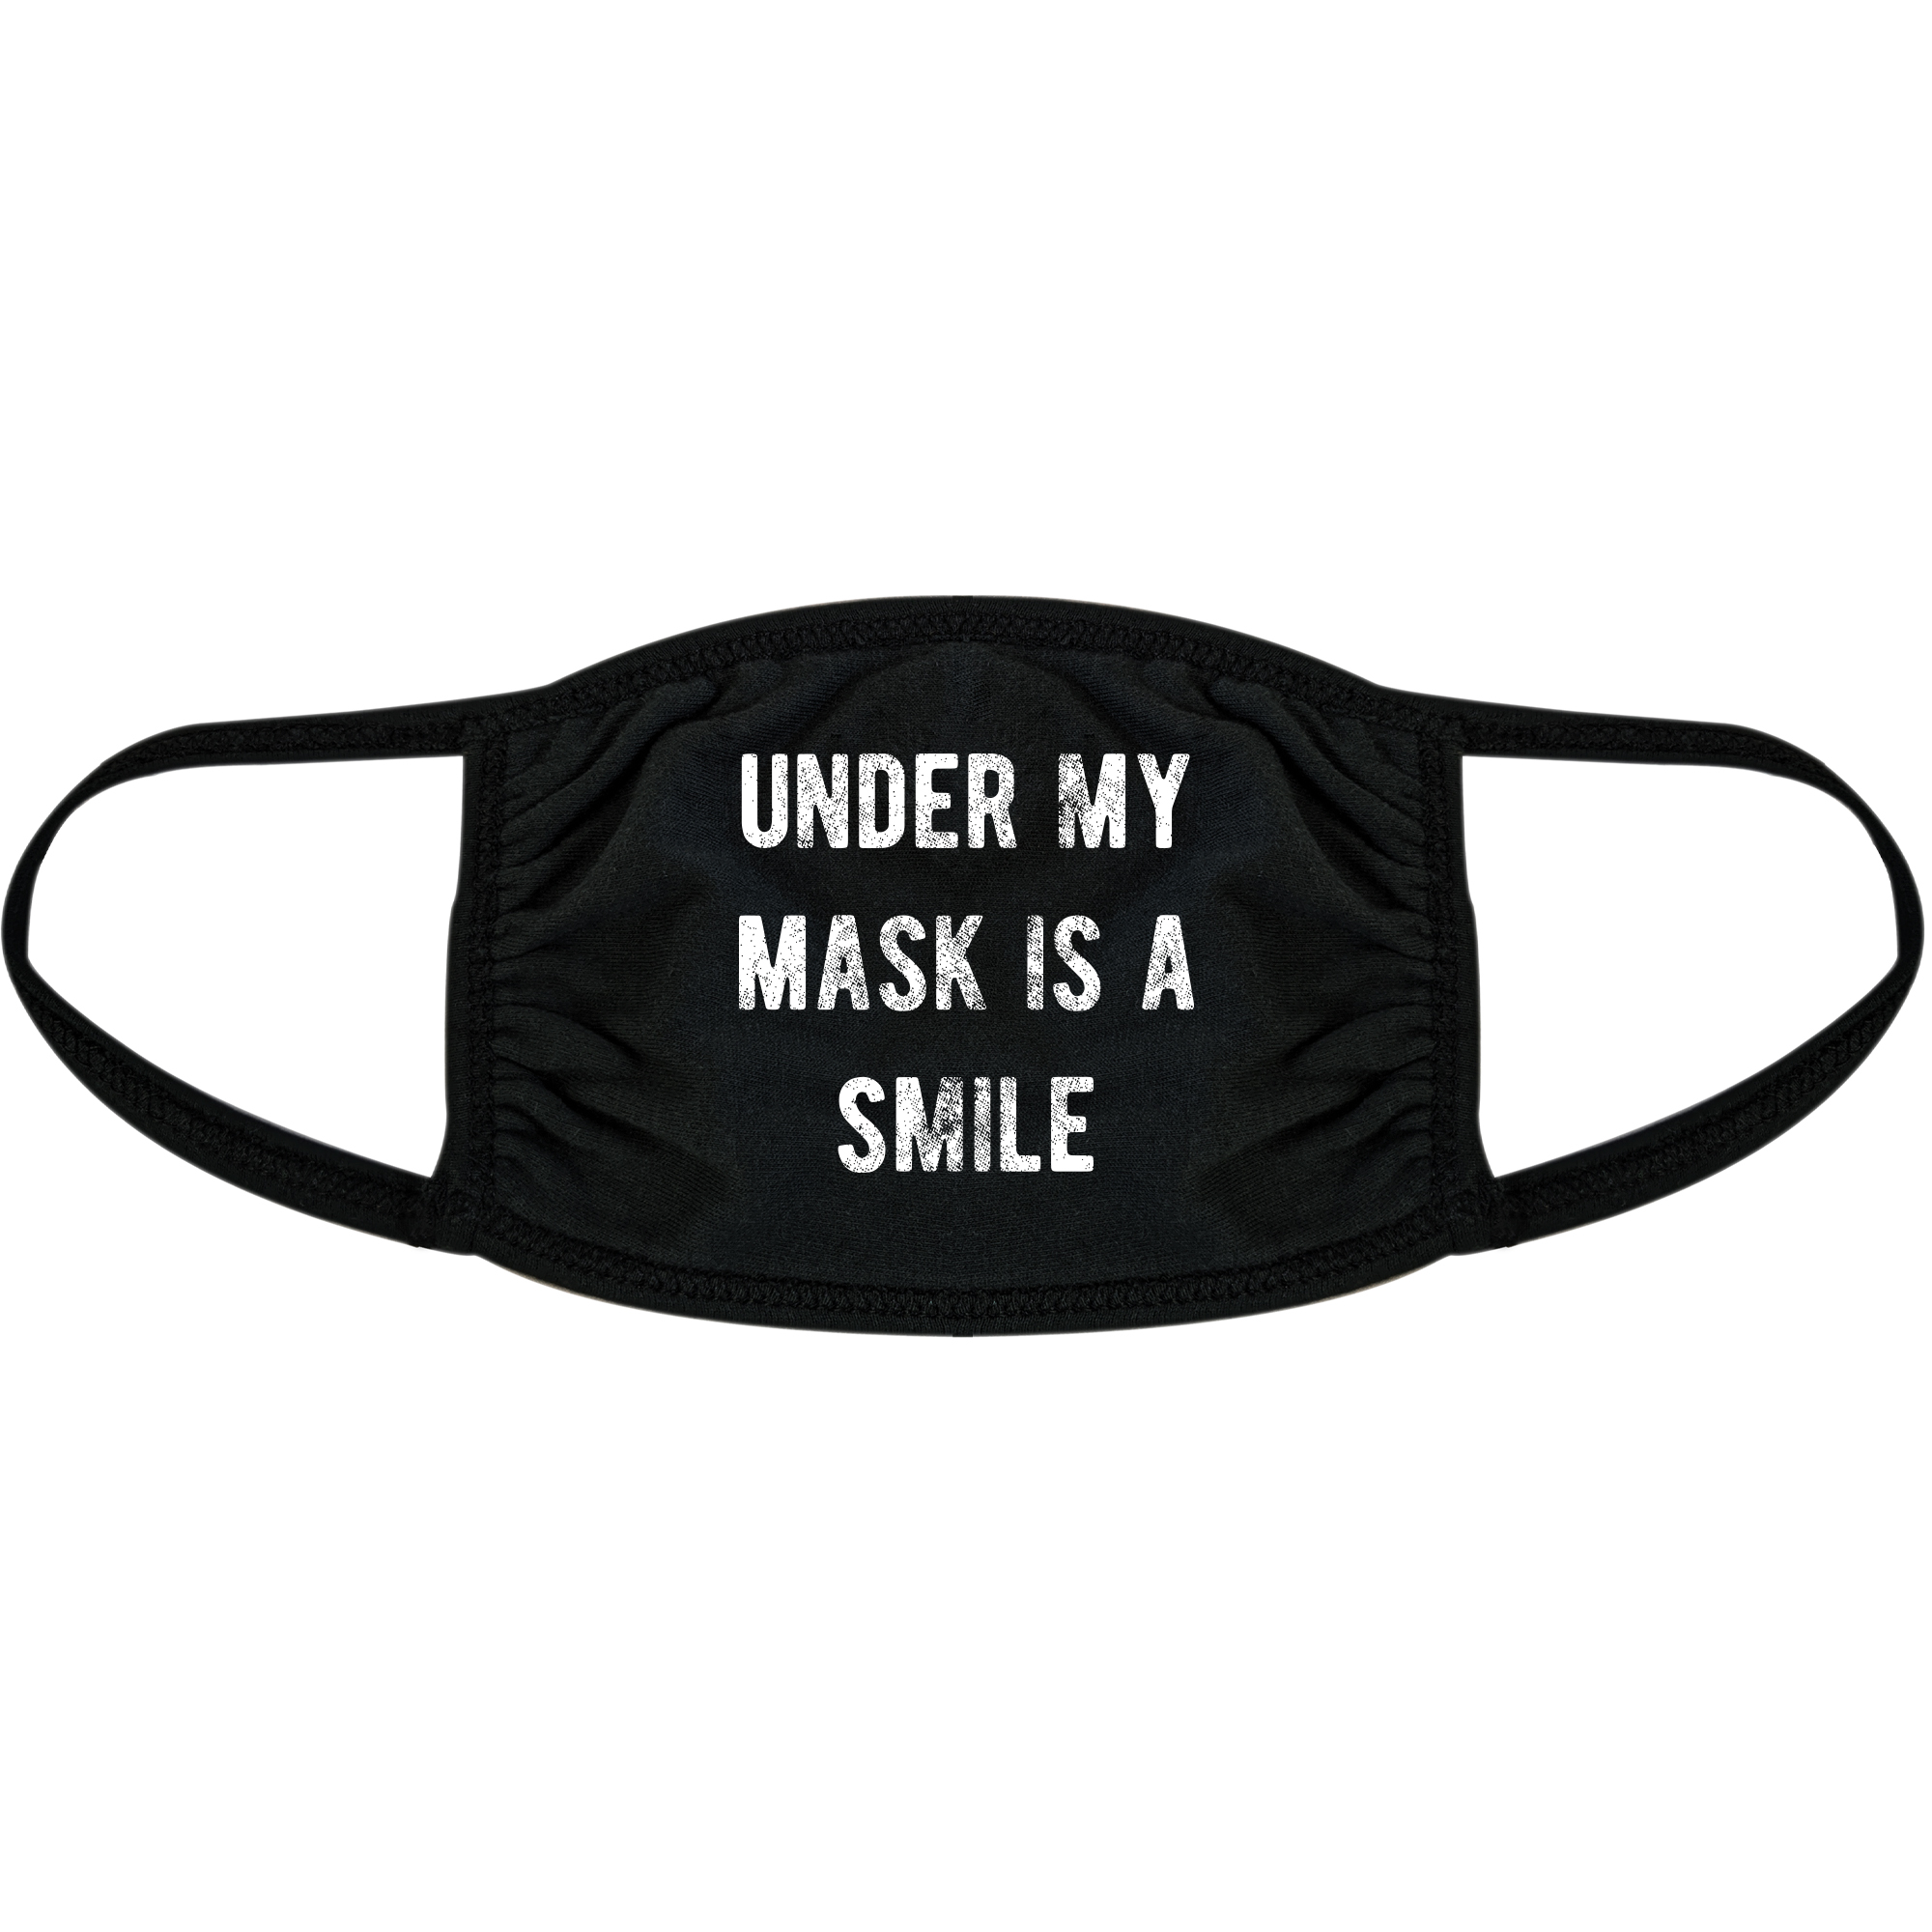 Under My Mask Is A Smile Face Mask Funny Happiness Positive Graphic Nose And Mouth Covering - image 1 of 6